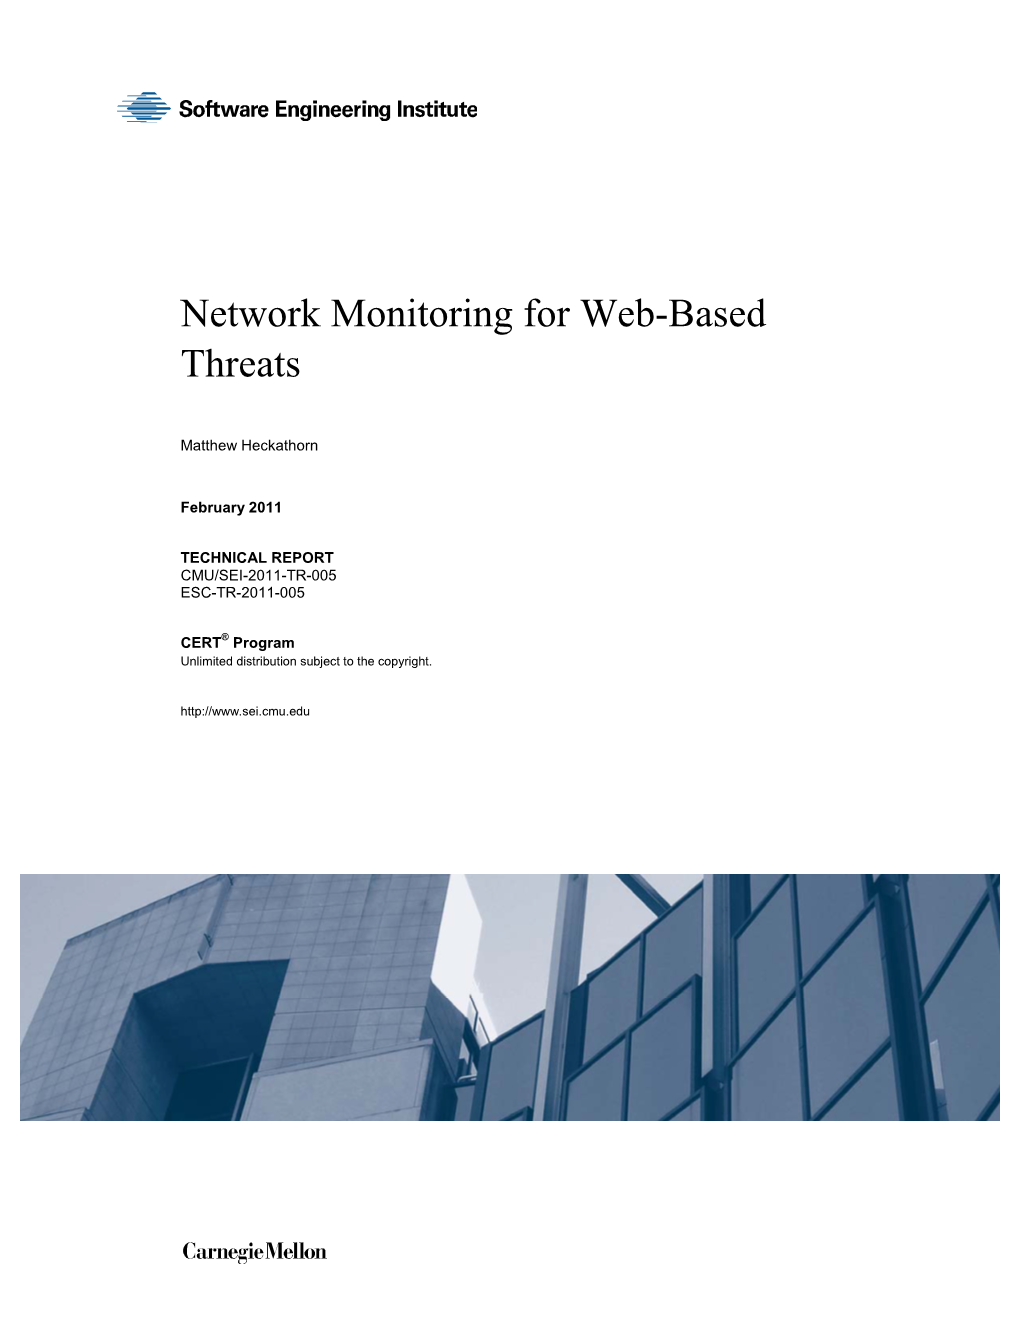 Network Monitoring for Web-Based Threats